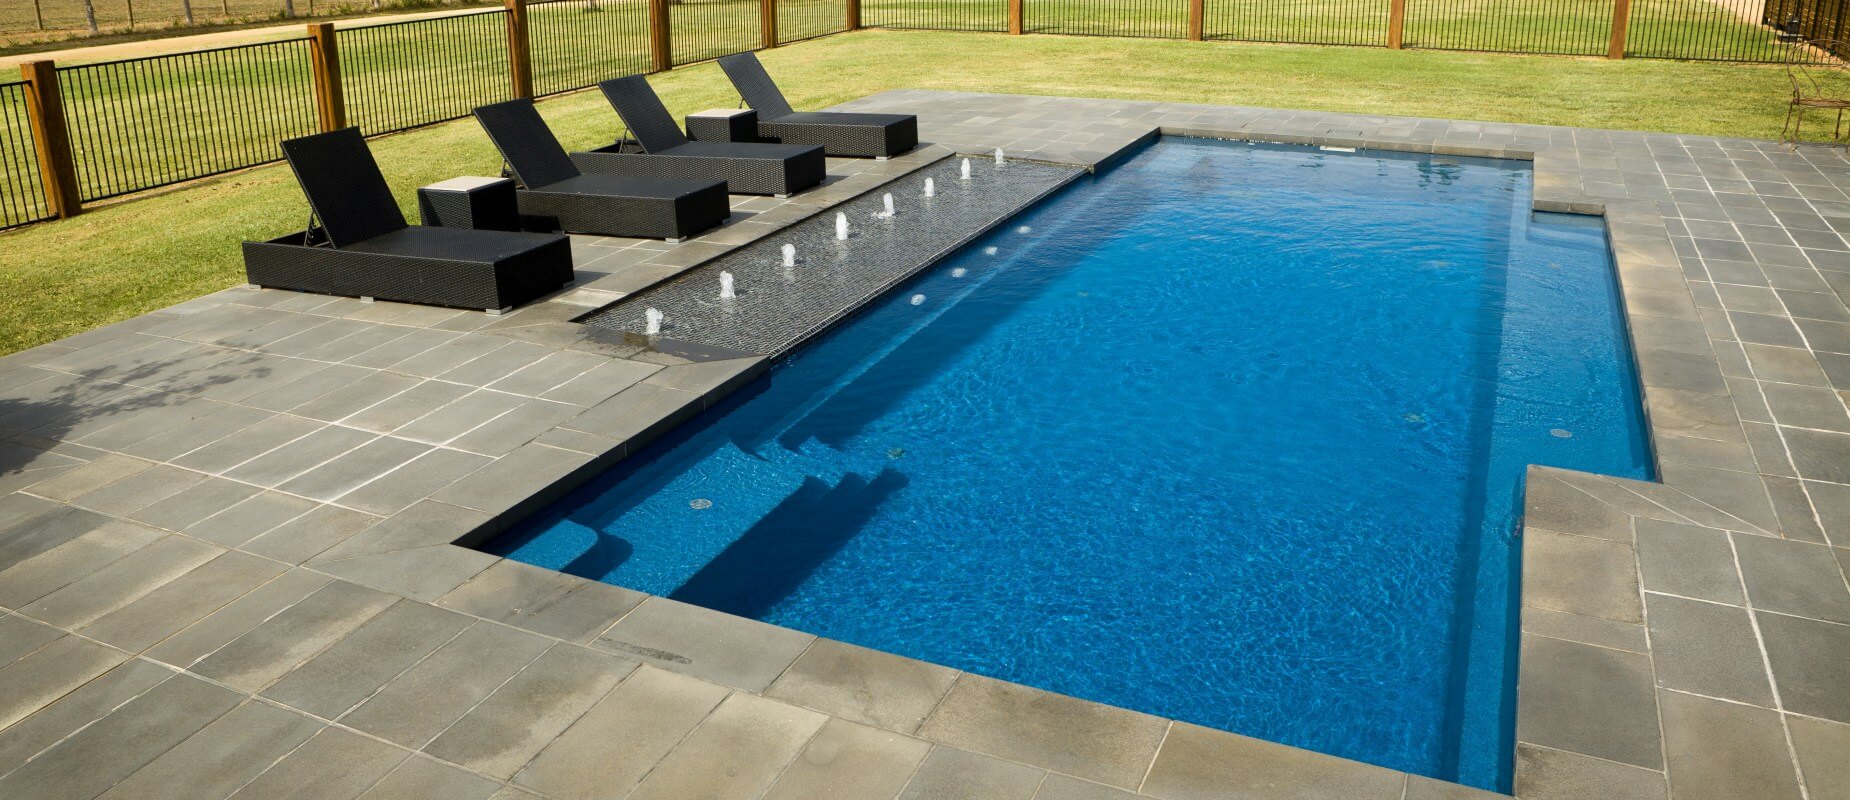 002-Compass-Pools-Australia_Vogue-smart-self-cleaning-family-pool-sunpod-water-feature